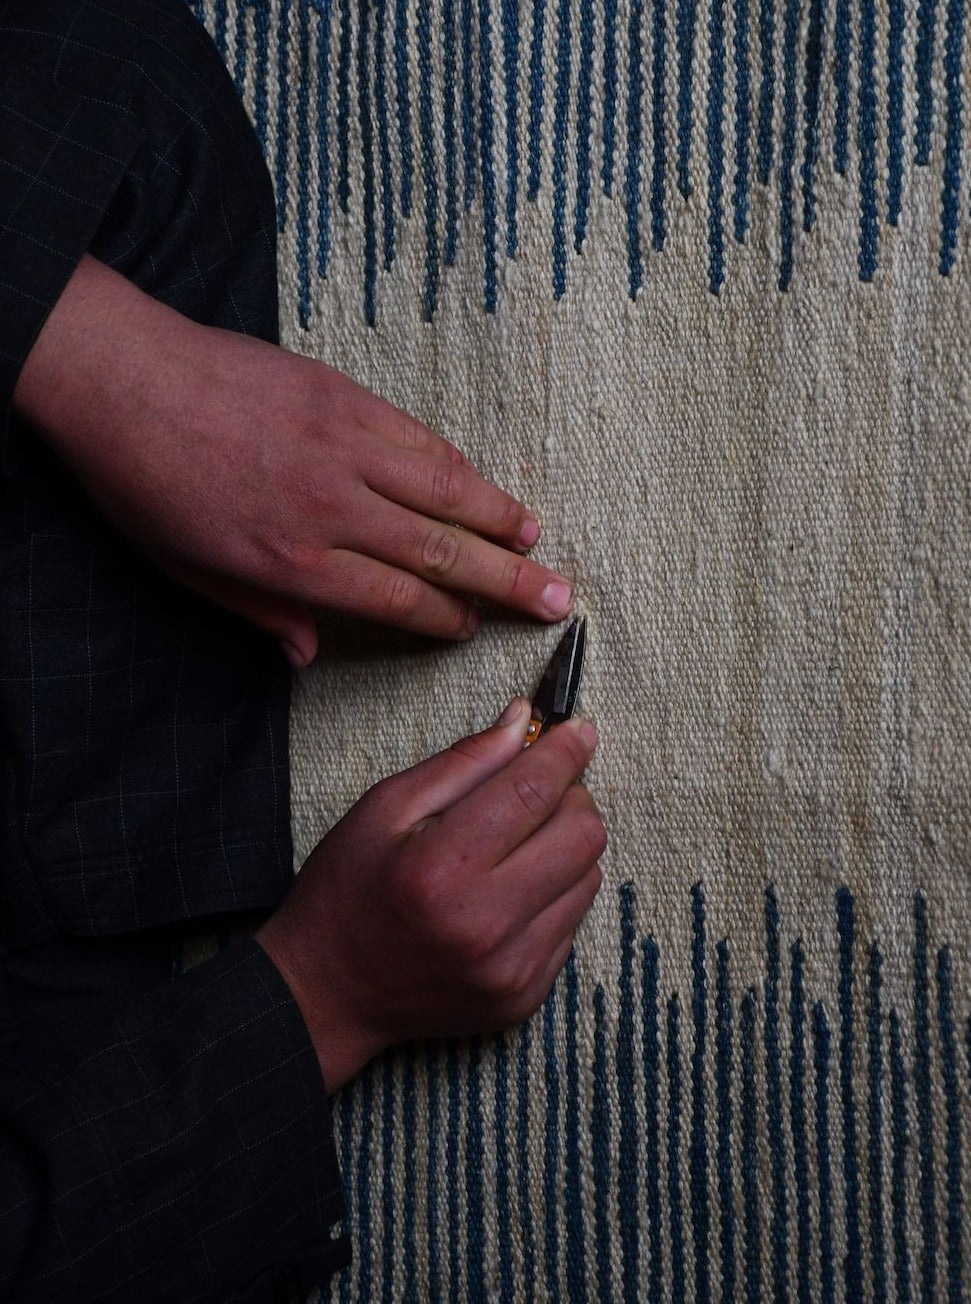 Two hands are seen repairing or trimming a handwoven wool kilim with a small tool. The fabric, adorned in natural dyes, features vertical lines in shades of blue and white. The hands are positioned close to the surface, indicating detailed, intricate work on this Navy Anar Kilim Runner - Handwoven Rug from ISHKAR.